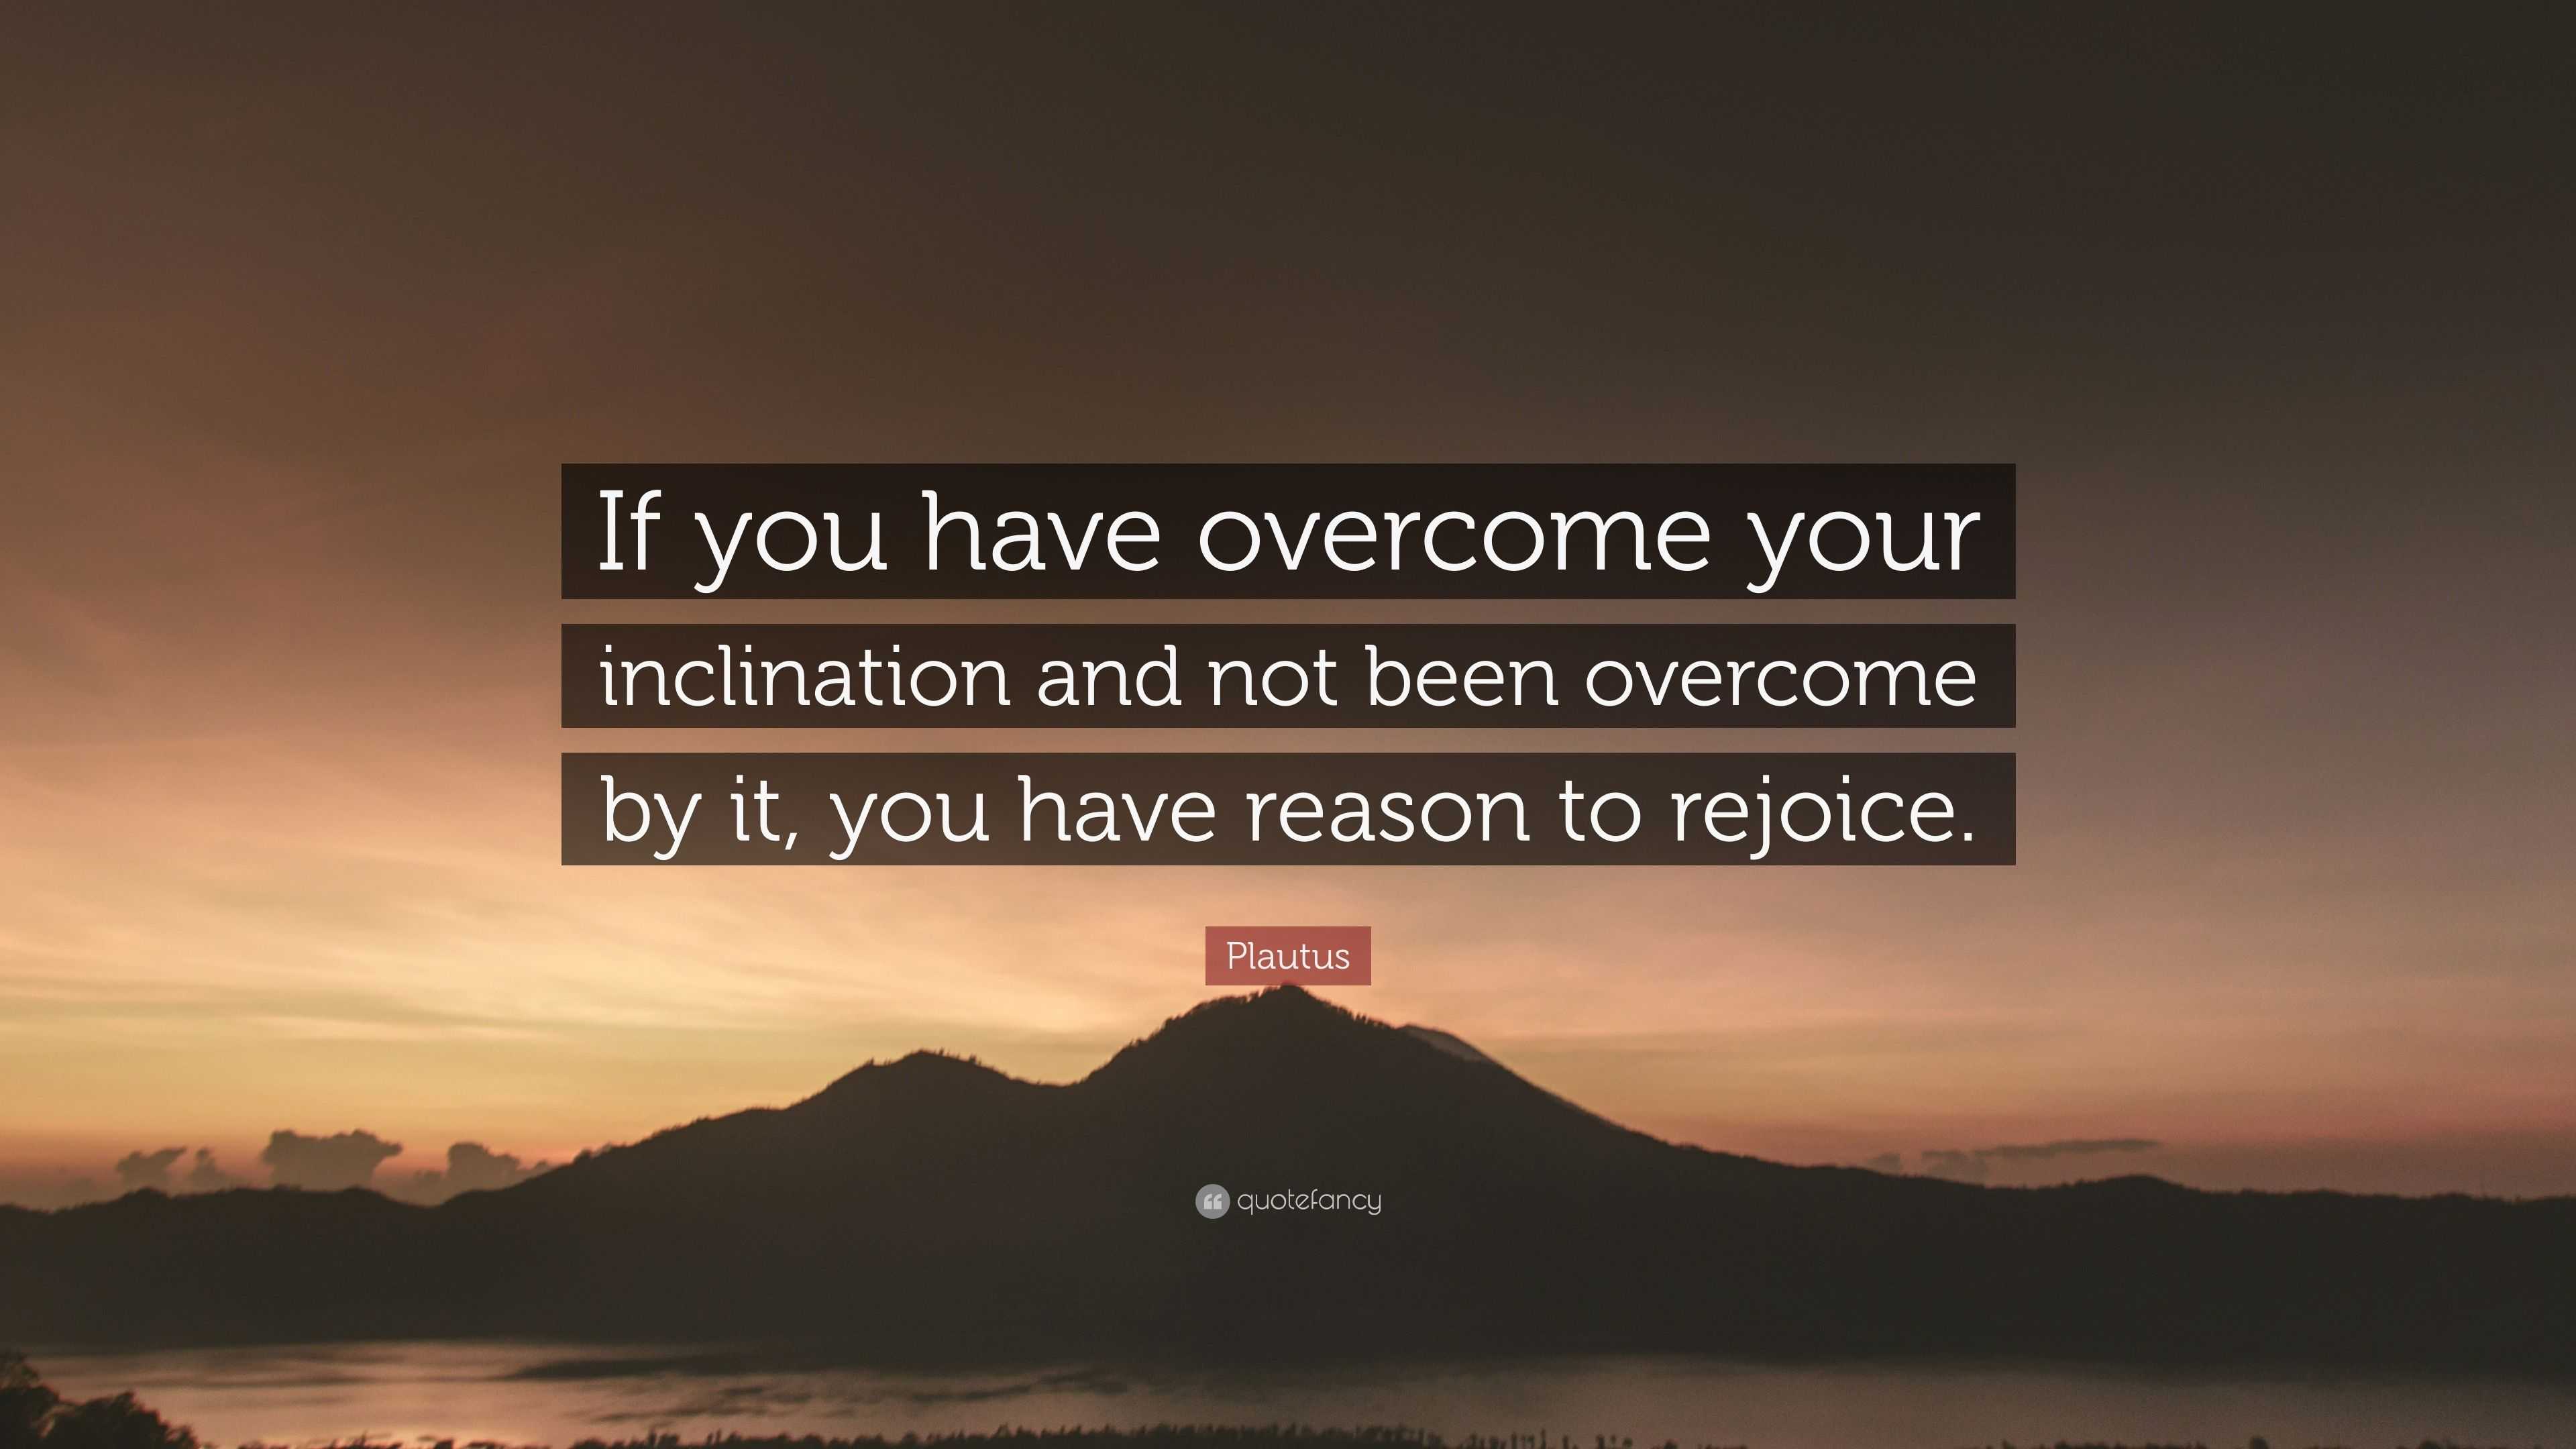 Plautus Quote: “If you have overcome your inclination and not been ...